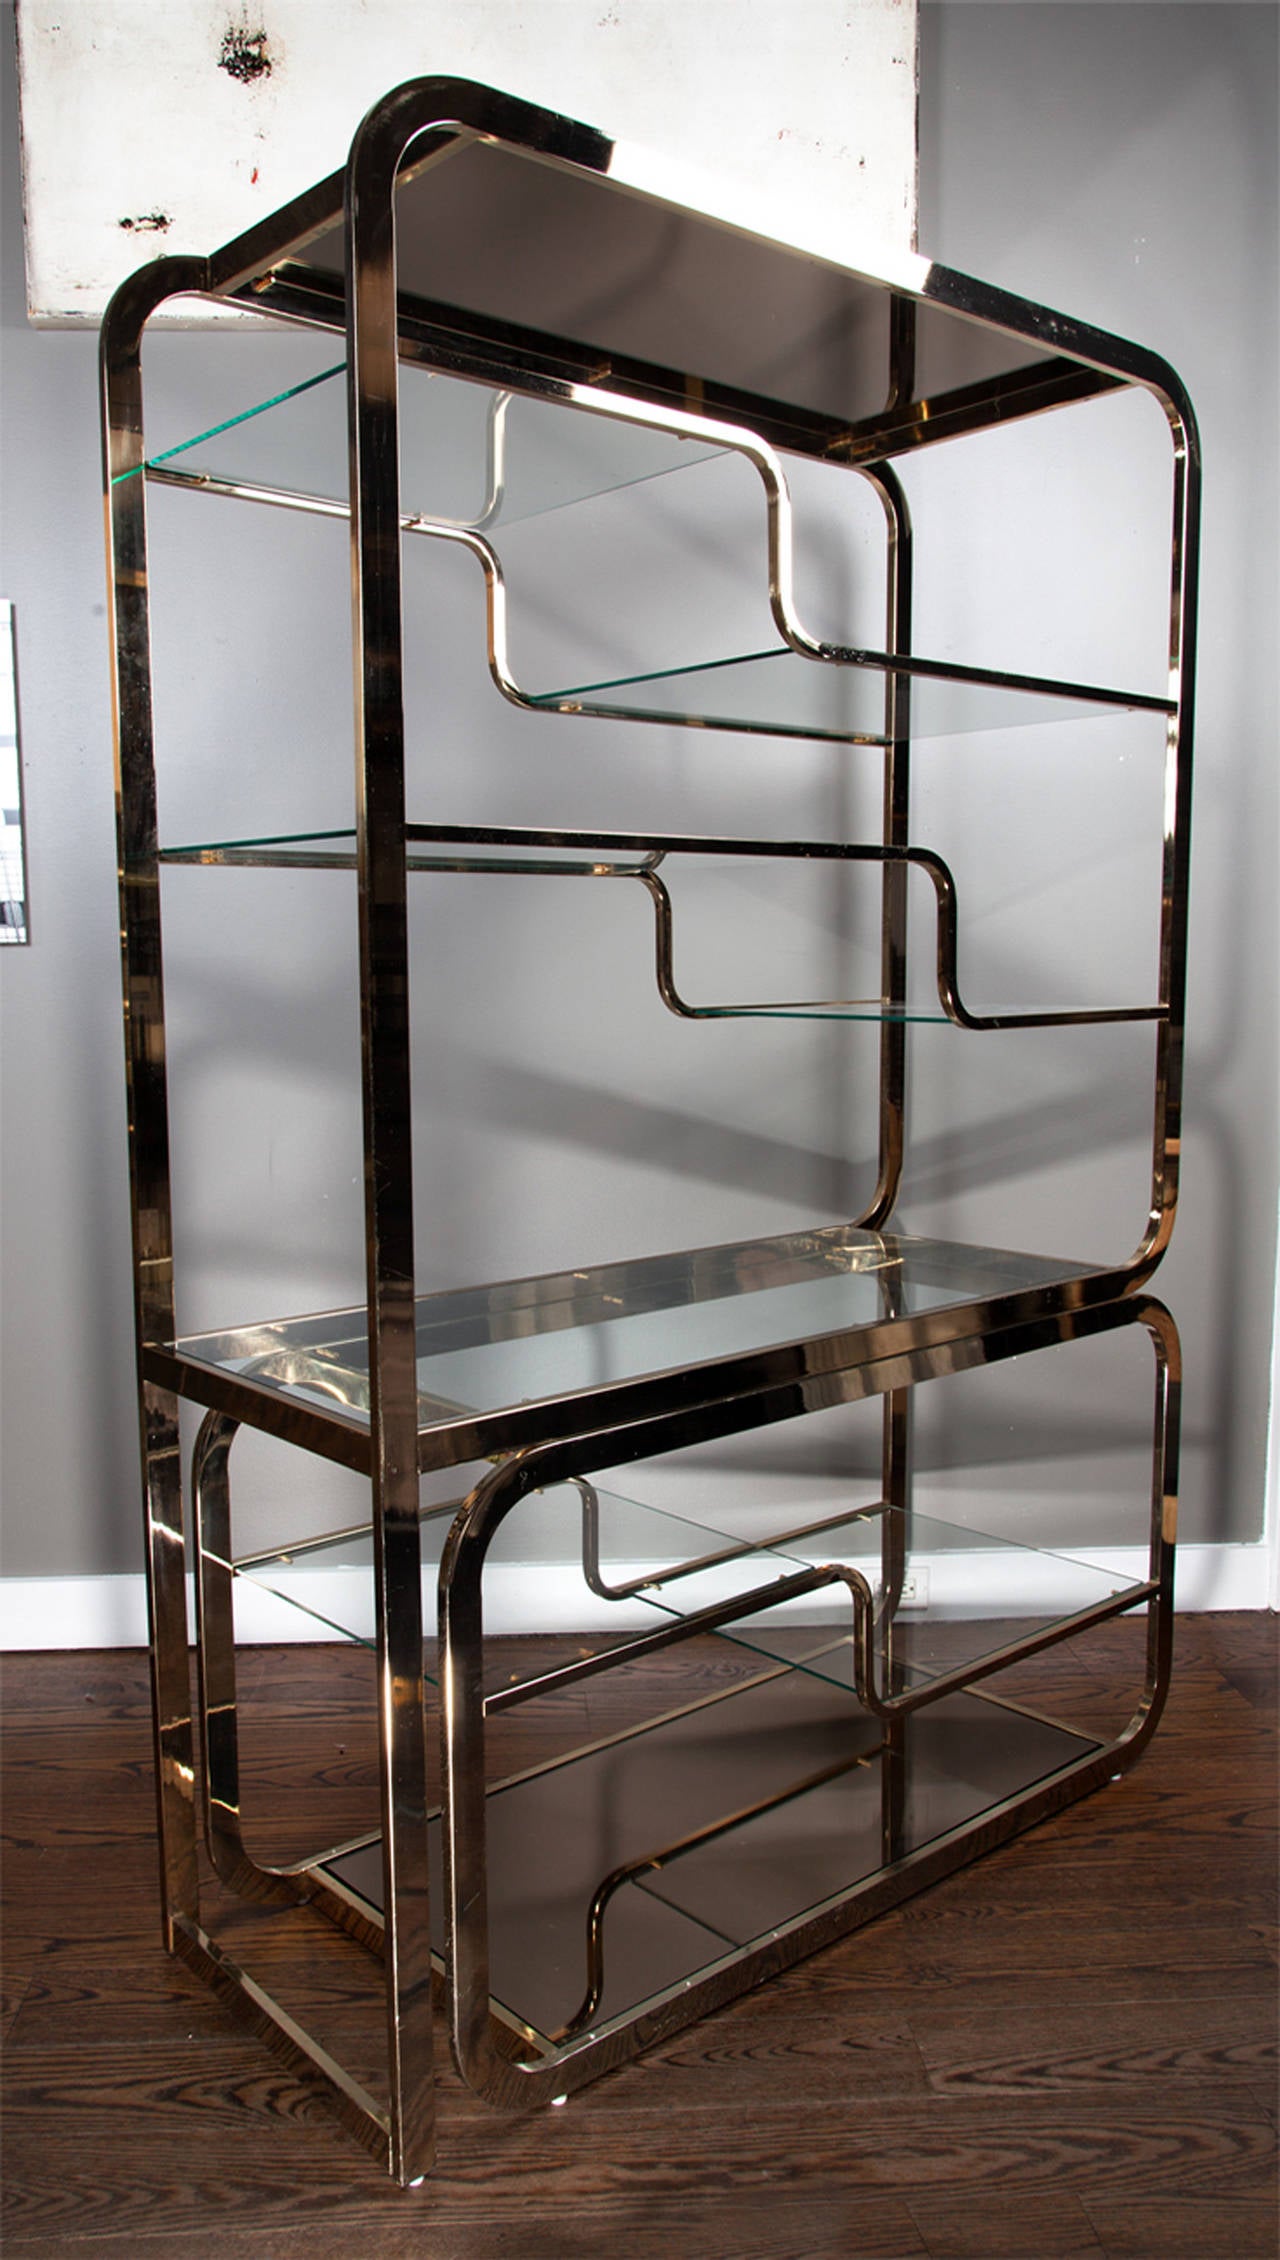 A brass Milo Baughman étagère with glass shelves. The two-piece design allows the bottom tier to be extended to the side, allowing for additional storage. The bottom shelf has a bronze inset mirrored top; the rest of the shelving is clear glass.